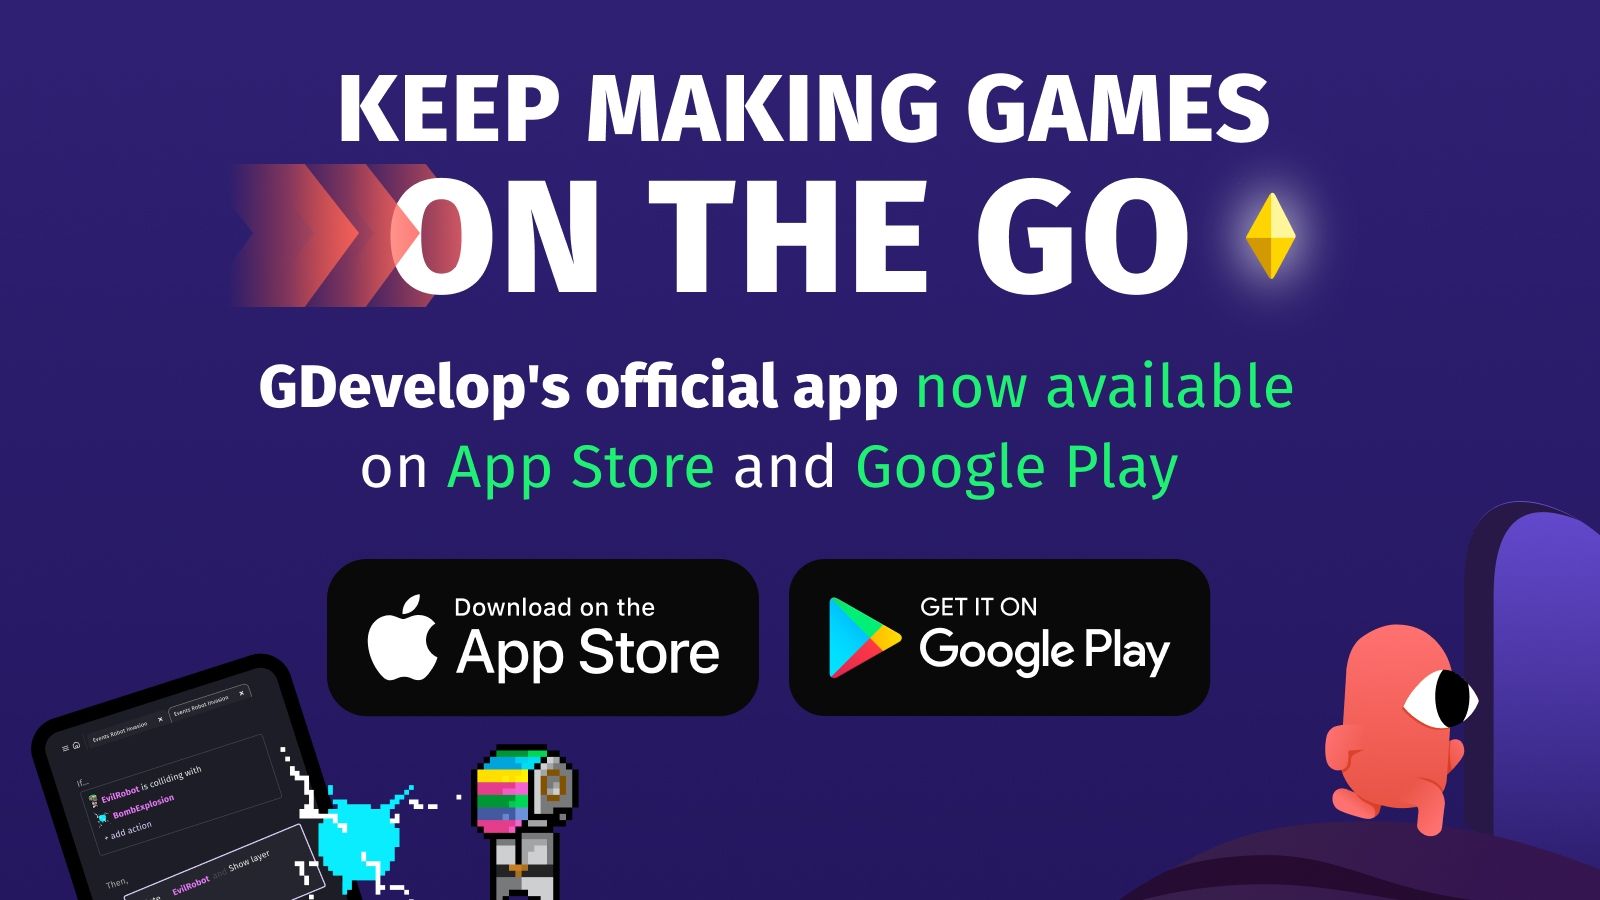 IO Games - Mobile games for Android & iOS